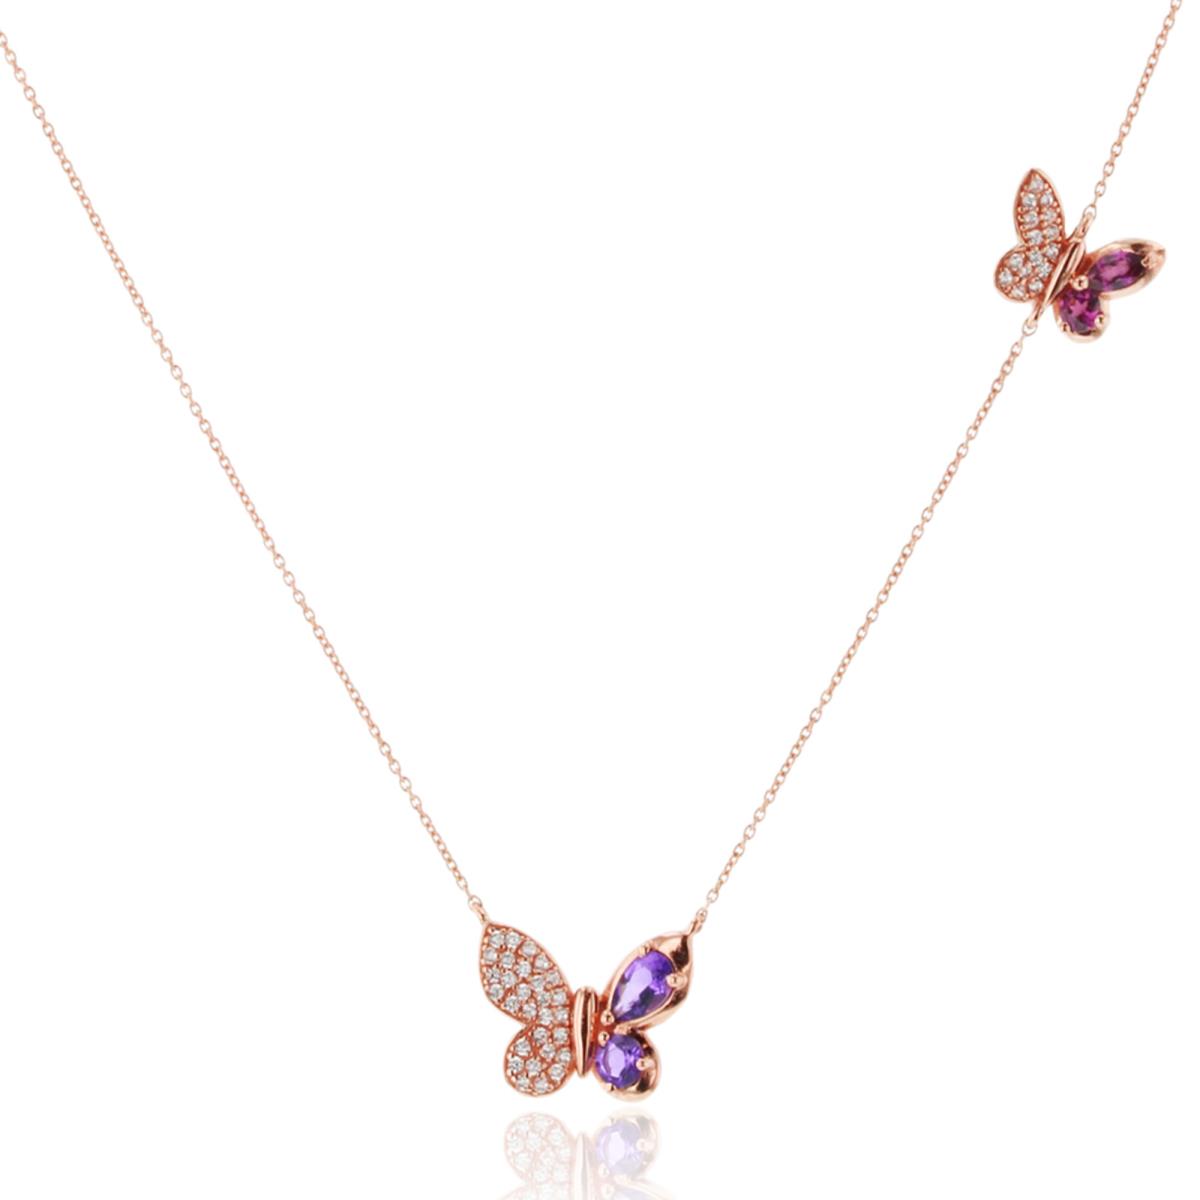 14K Rose Gold 0.132cttw Rnd Diamonds & Rnd, PS and MQ Cut Ruby Double Butterfly 18"Necklace